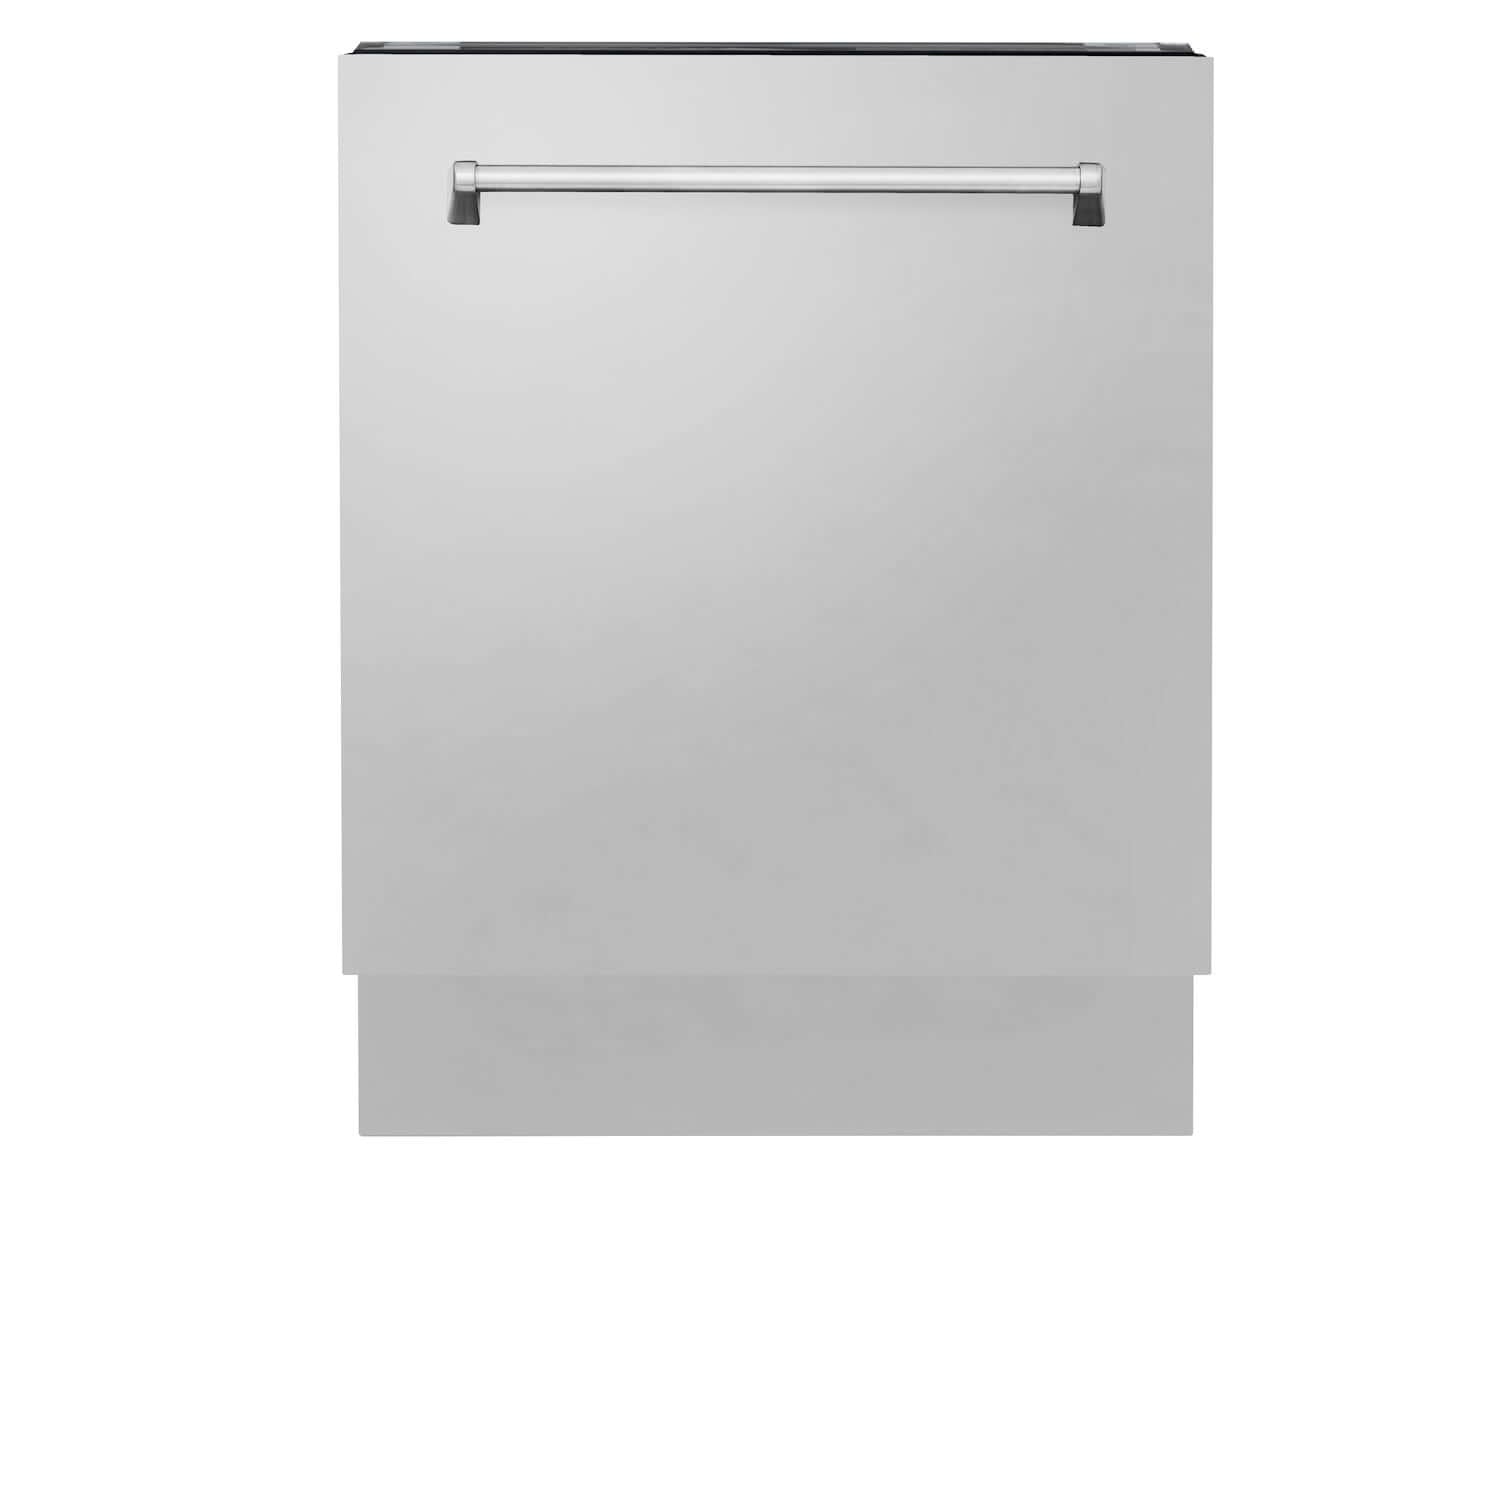 ZLINE 24" Stainless Steel Dishwasher front with door closed.